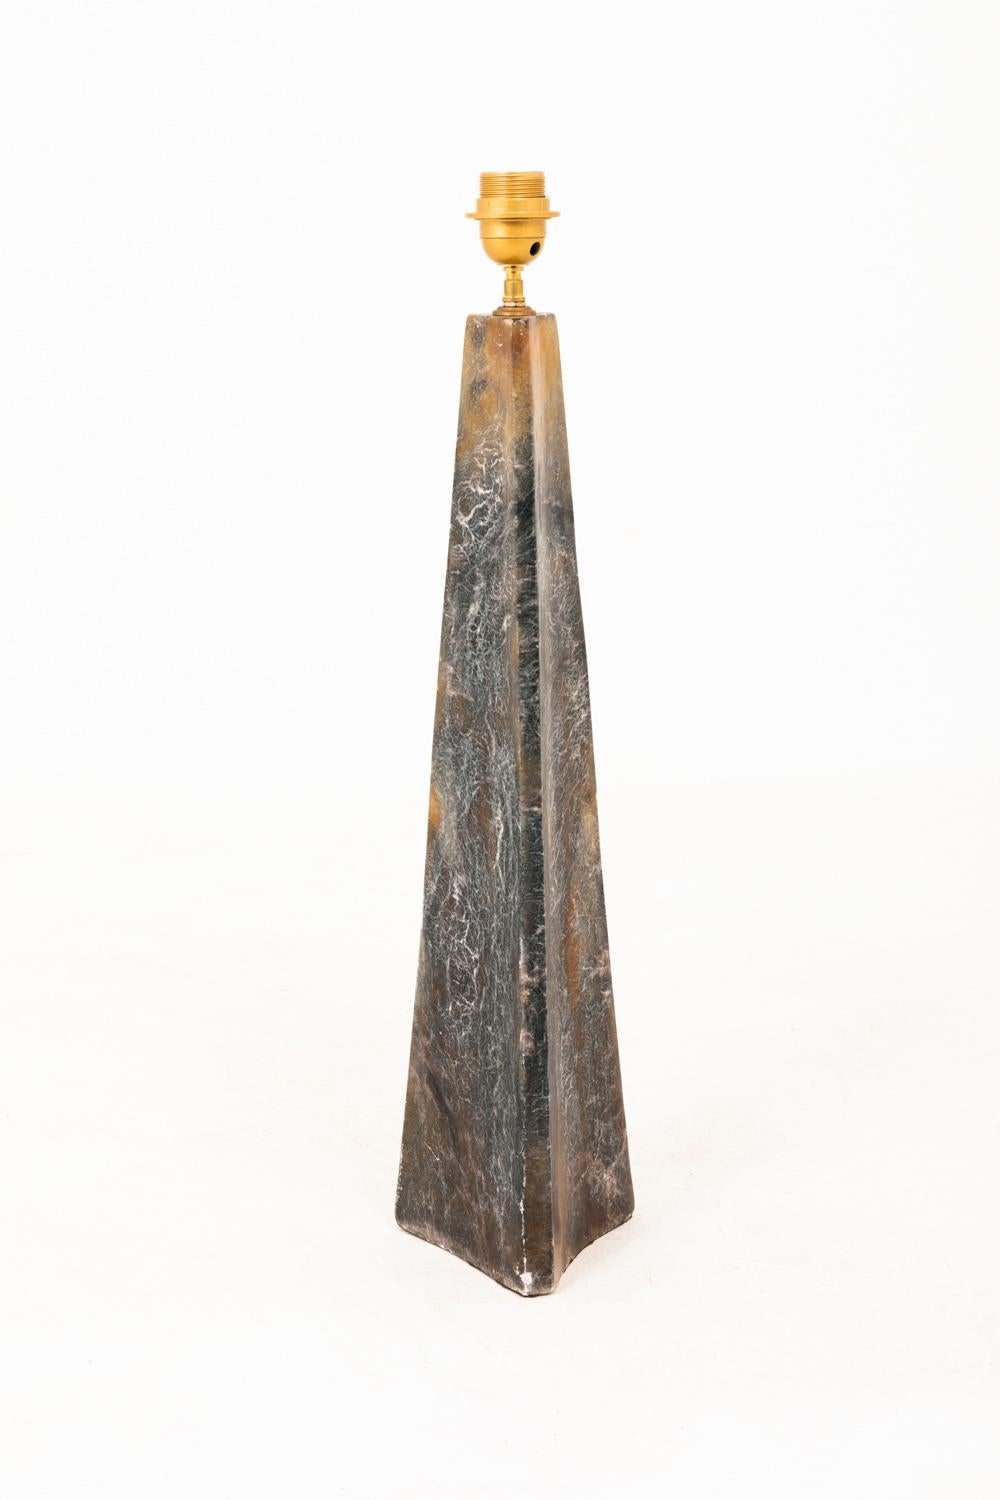 Triangular conical shape lamp in onyx, in grey, white and yellow tones.

Work realized in the 20th century.

New and functional electrical system.